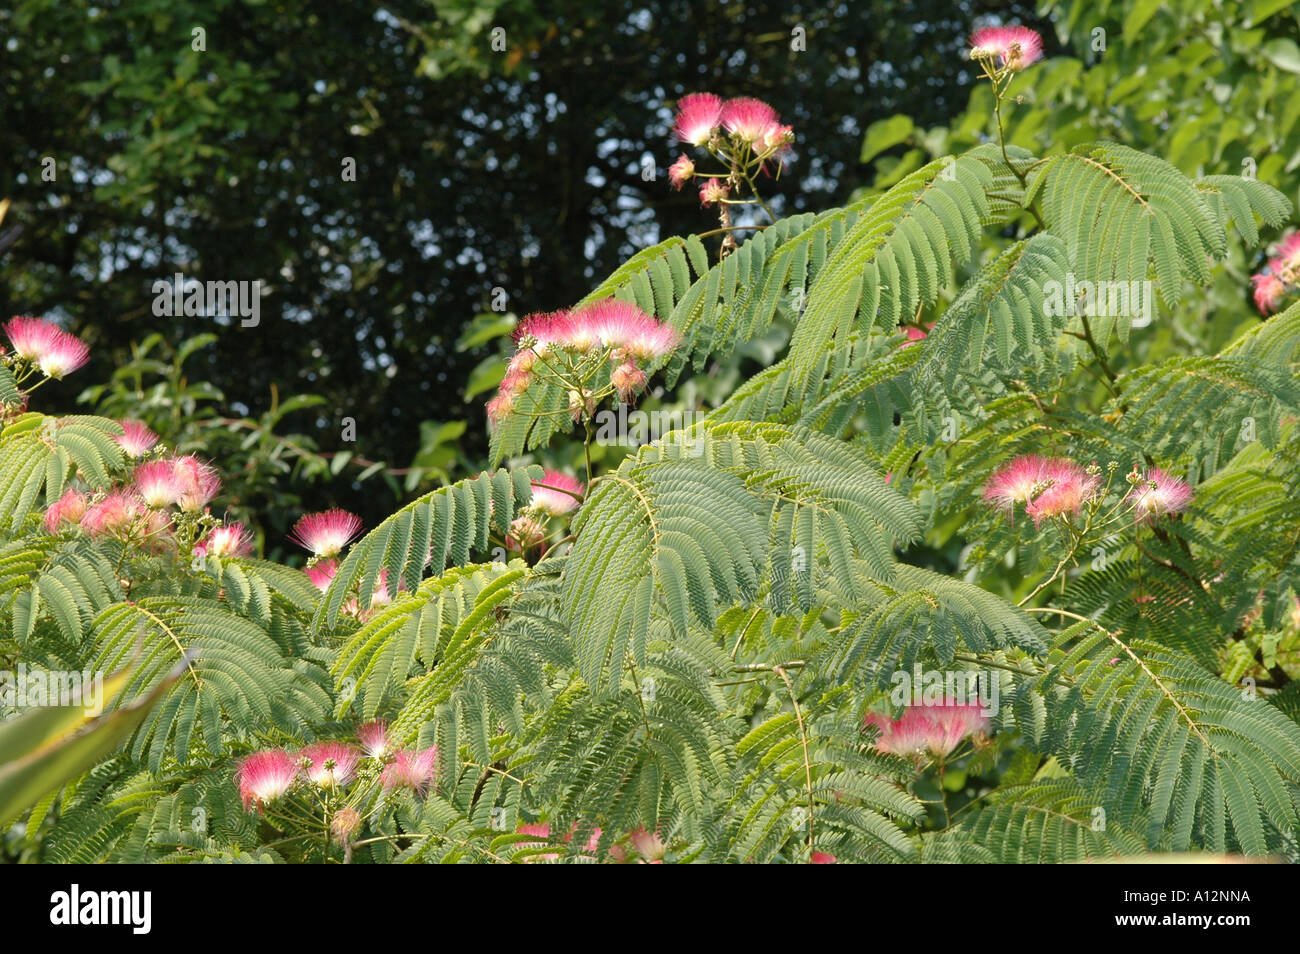 Albizia julibrissin var rosea Small garden tree or shrub with unusal pink flowers and fer like foliage Stock Photo